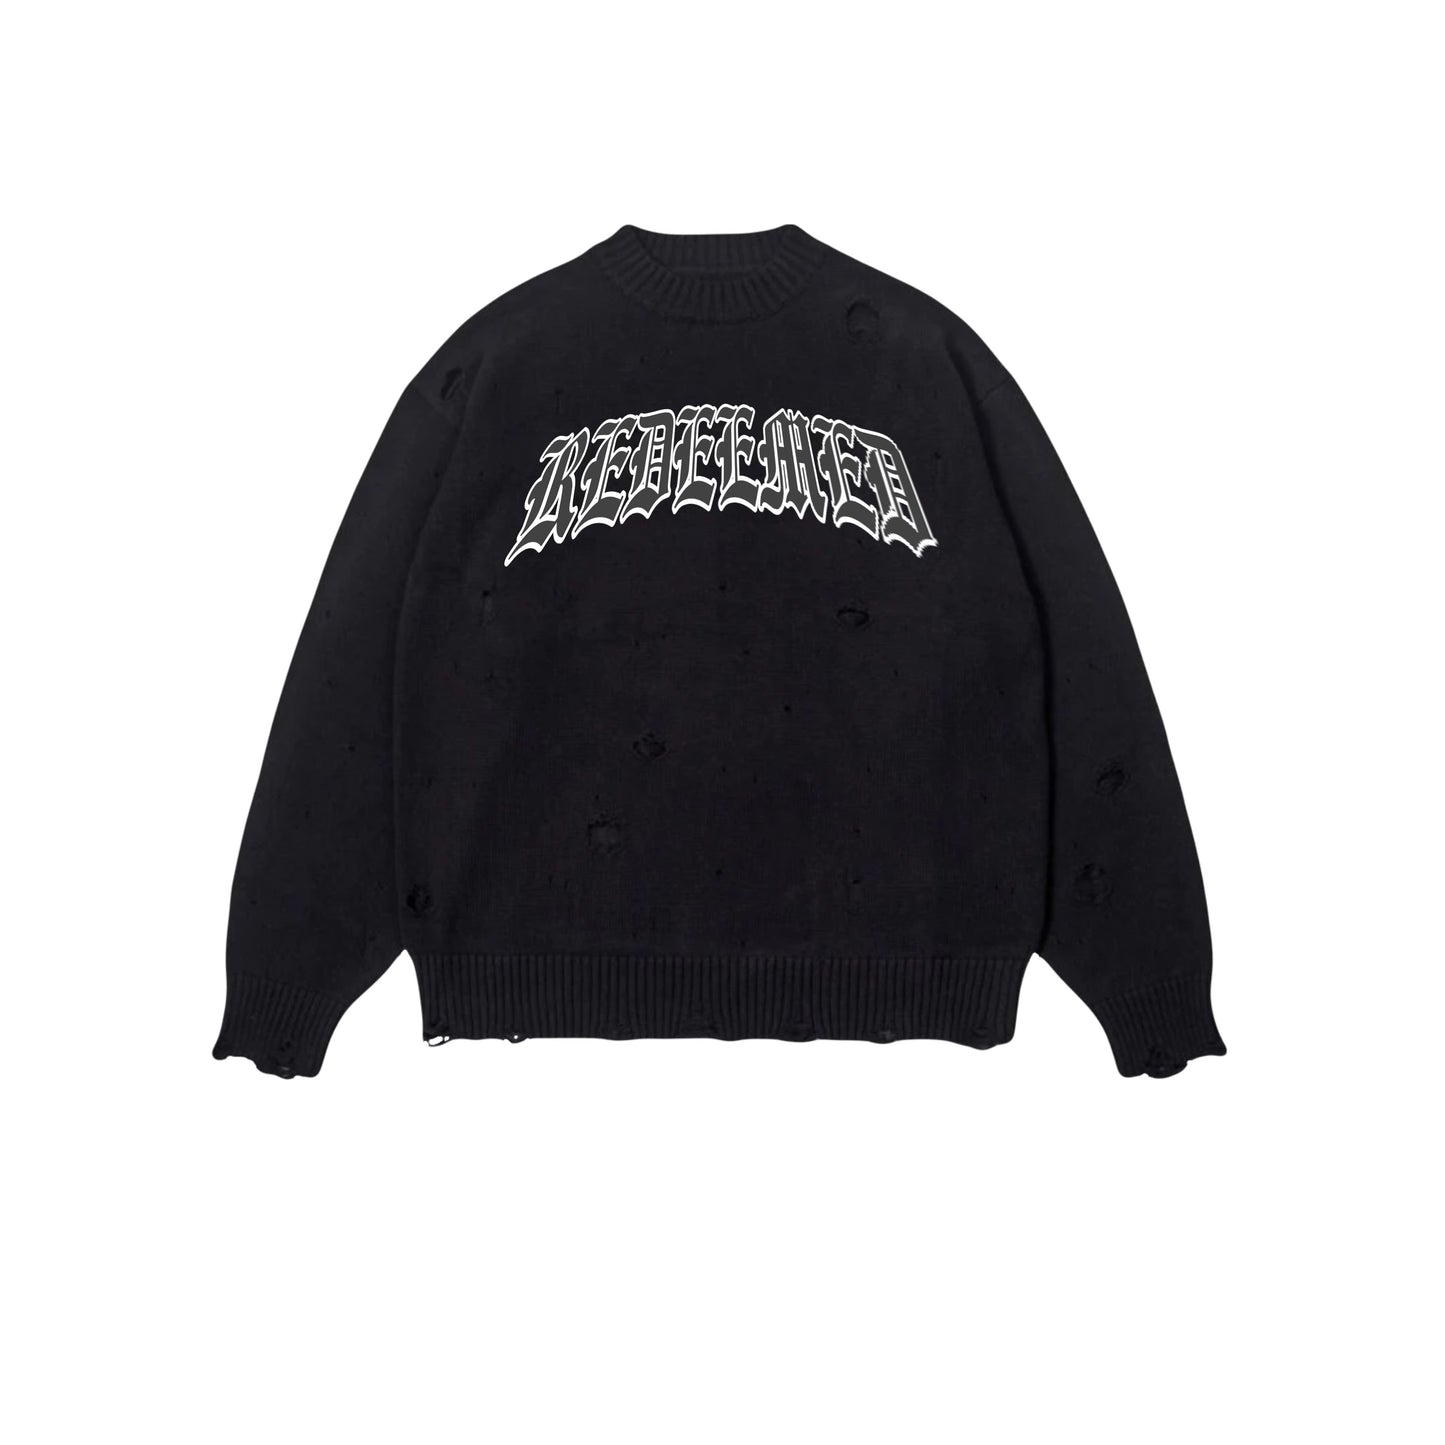 Redeemed Distressed Knit Sweater